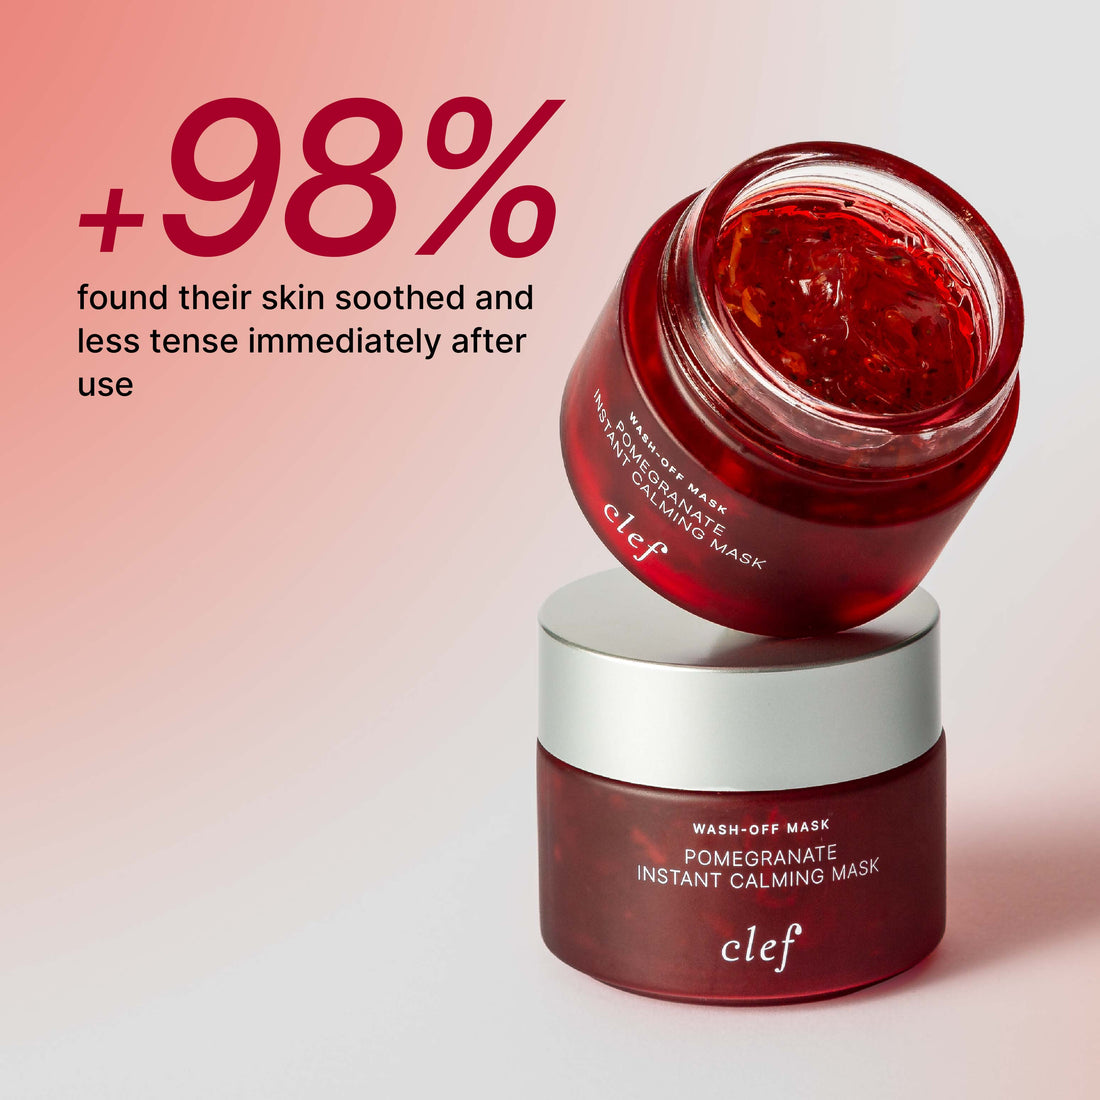 CLEF Pomegranate Instant Calming Mask